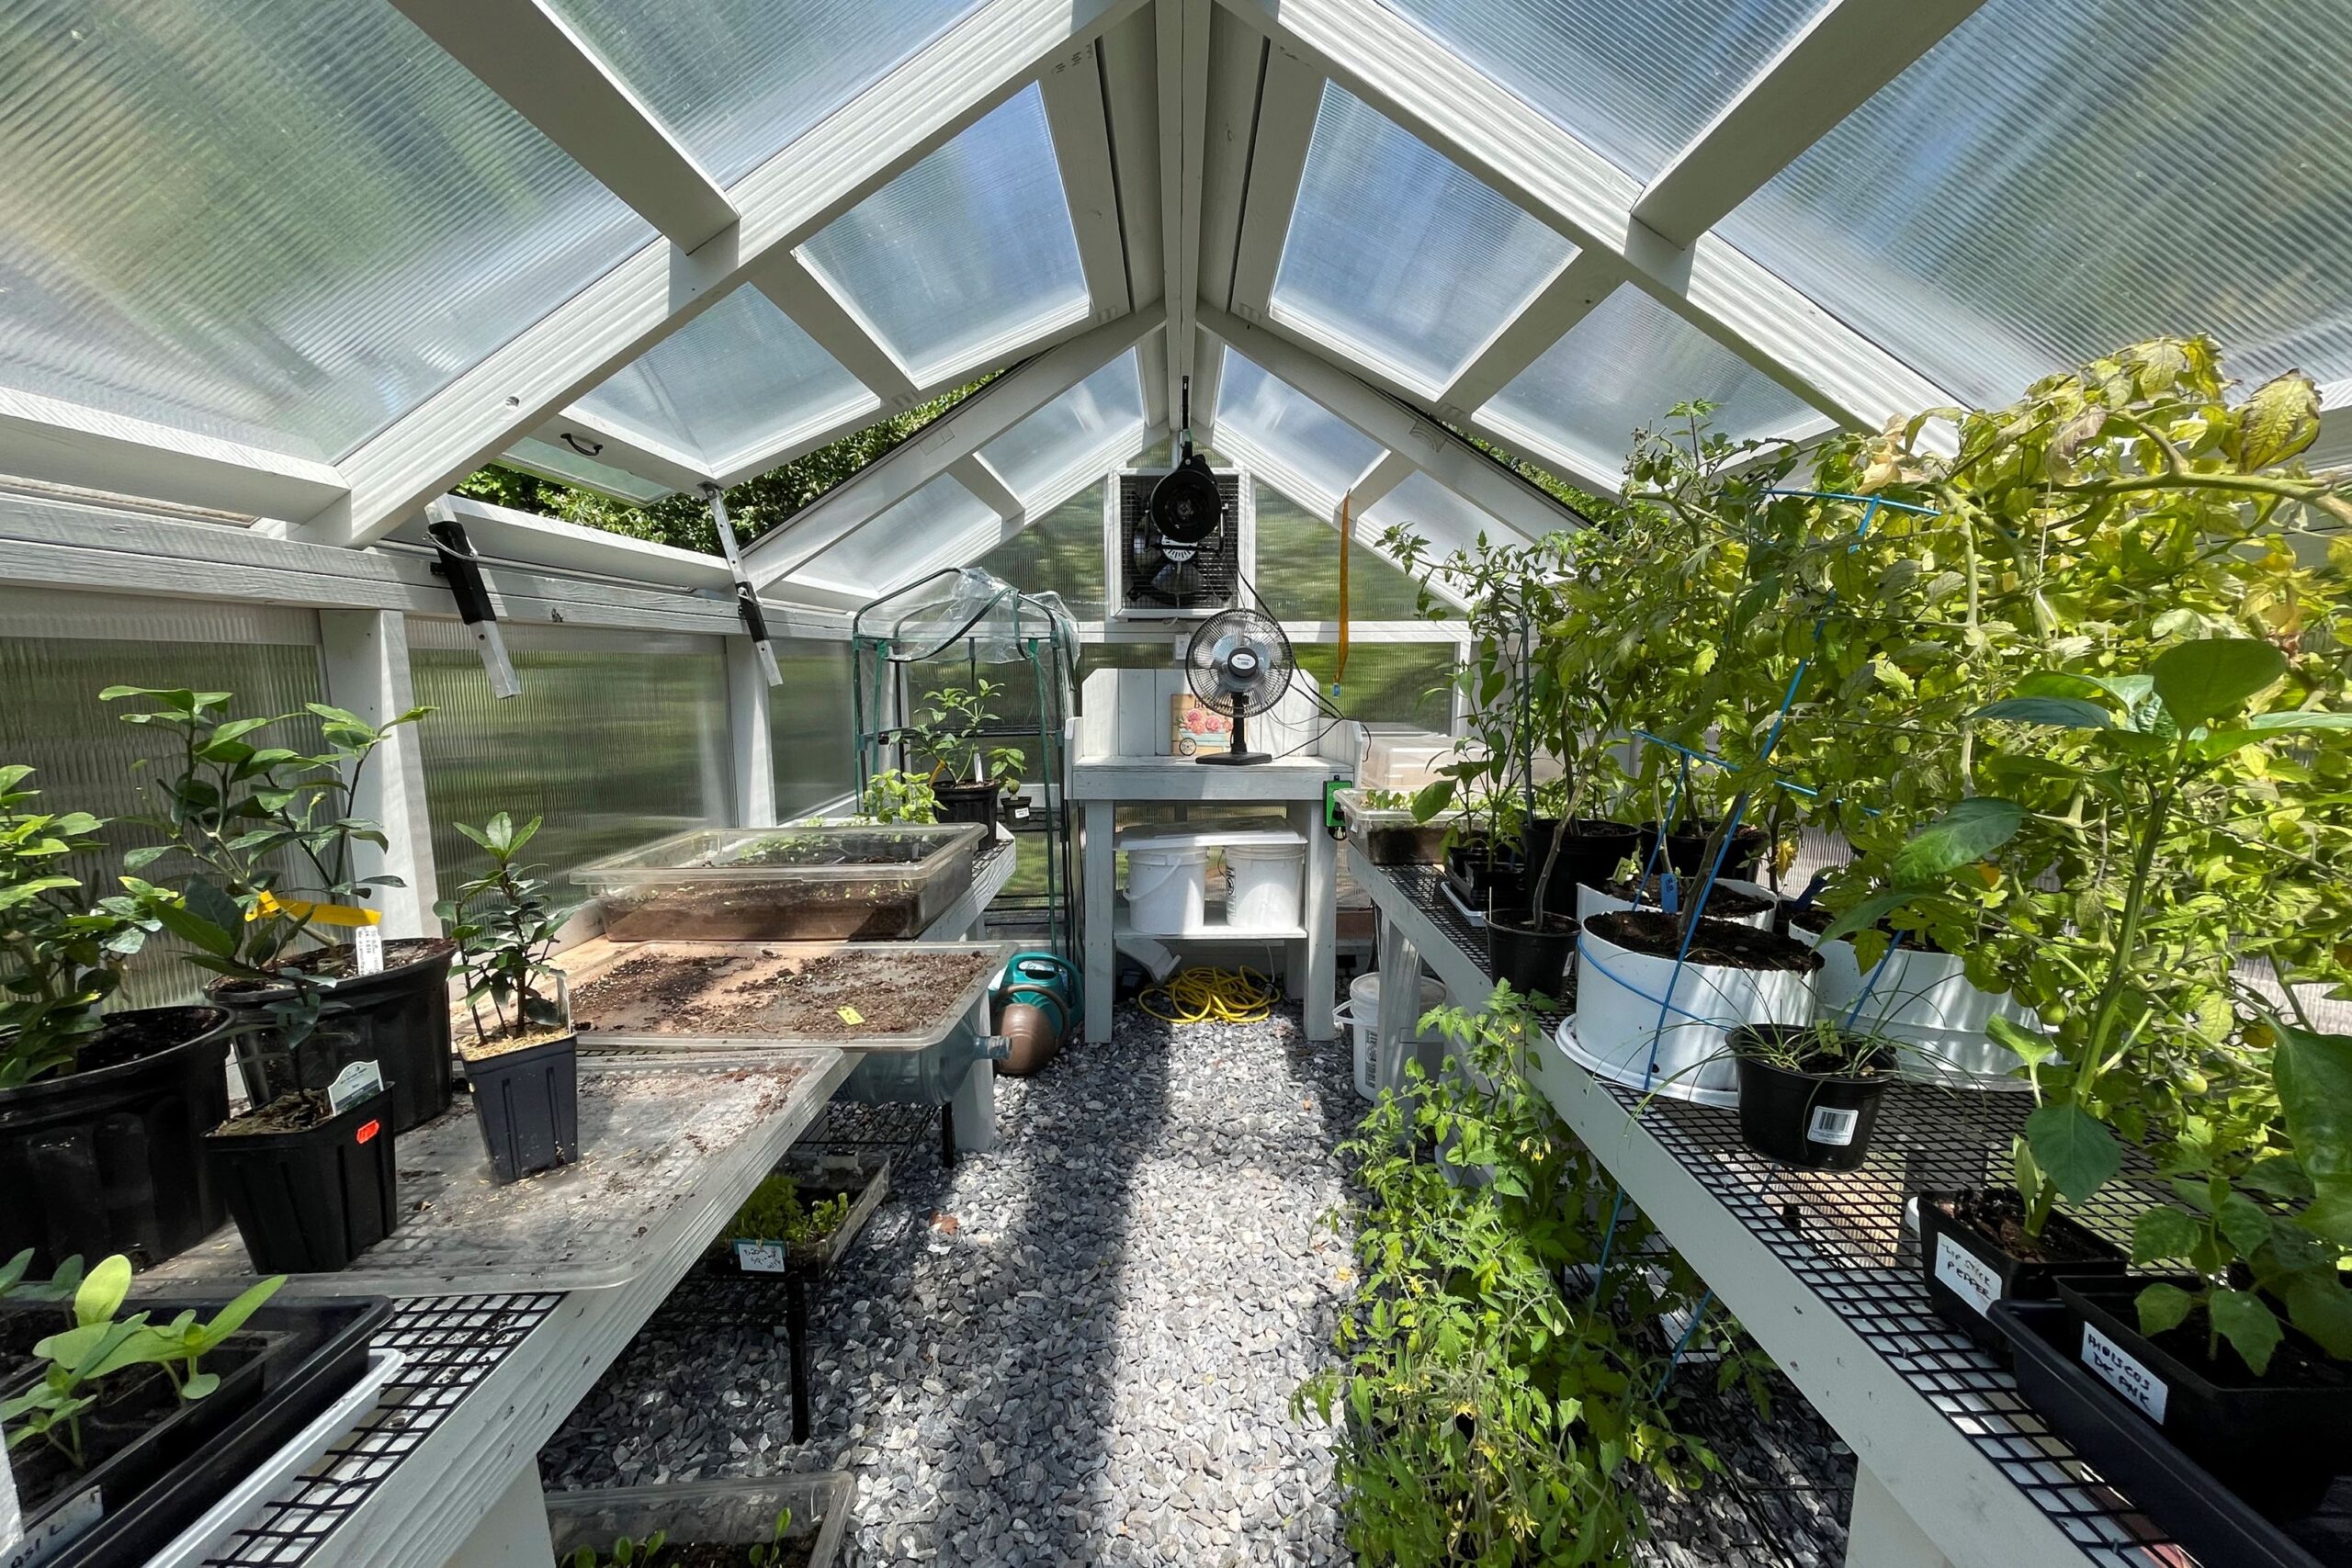 Interior of an A-Frame Greenhouse with white siding and full of plants on shelves